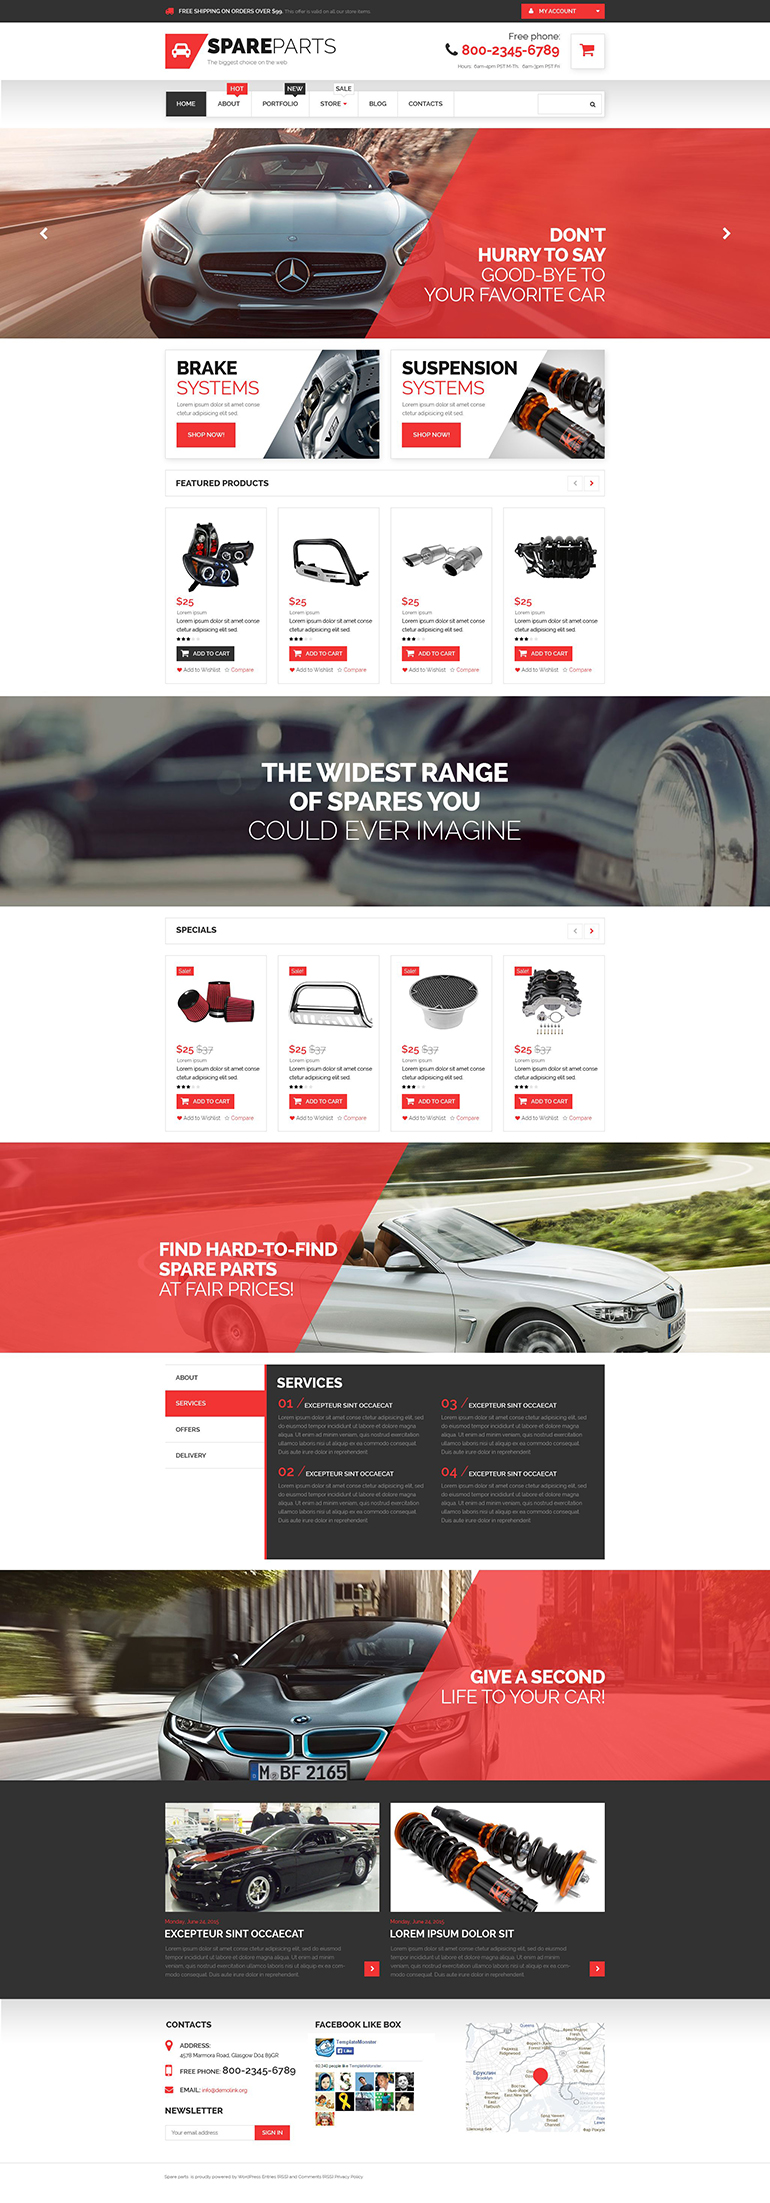 15+ Best WordPress Themes For Your eCommerce Website 5